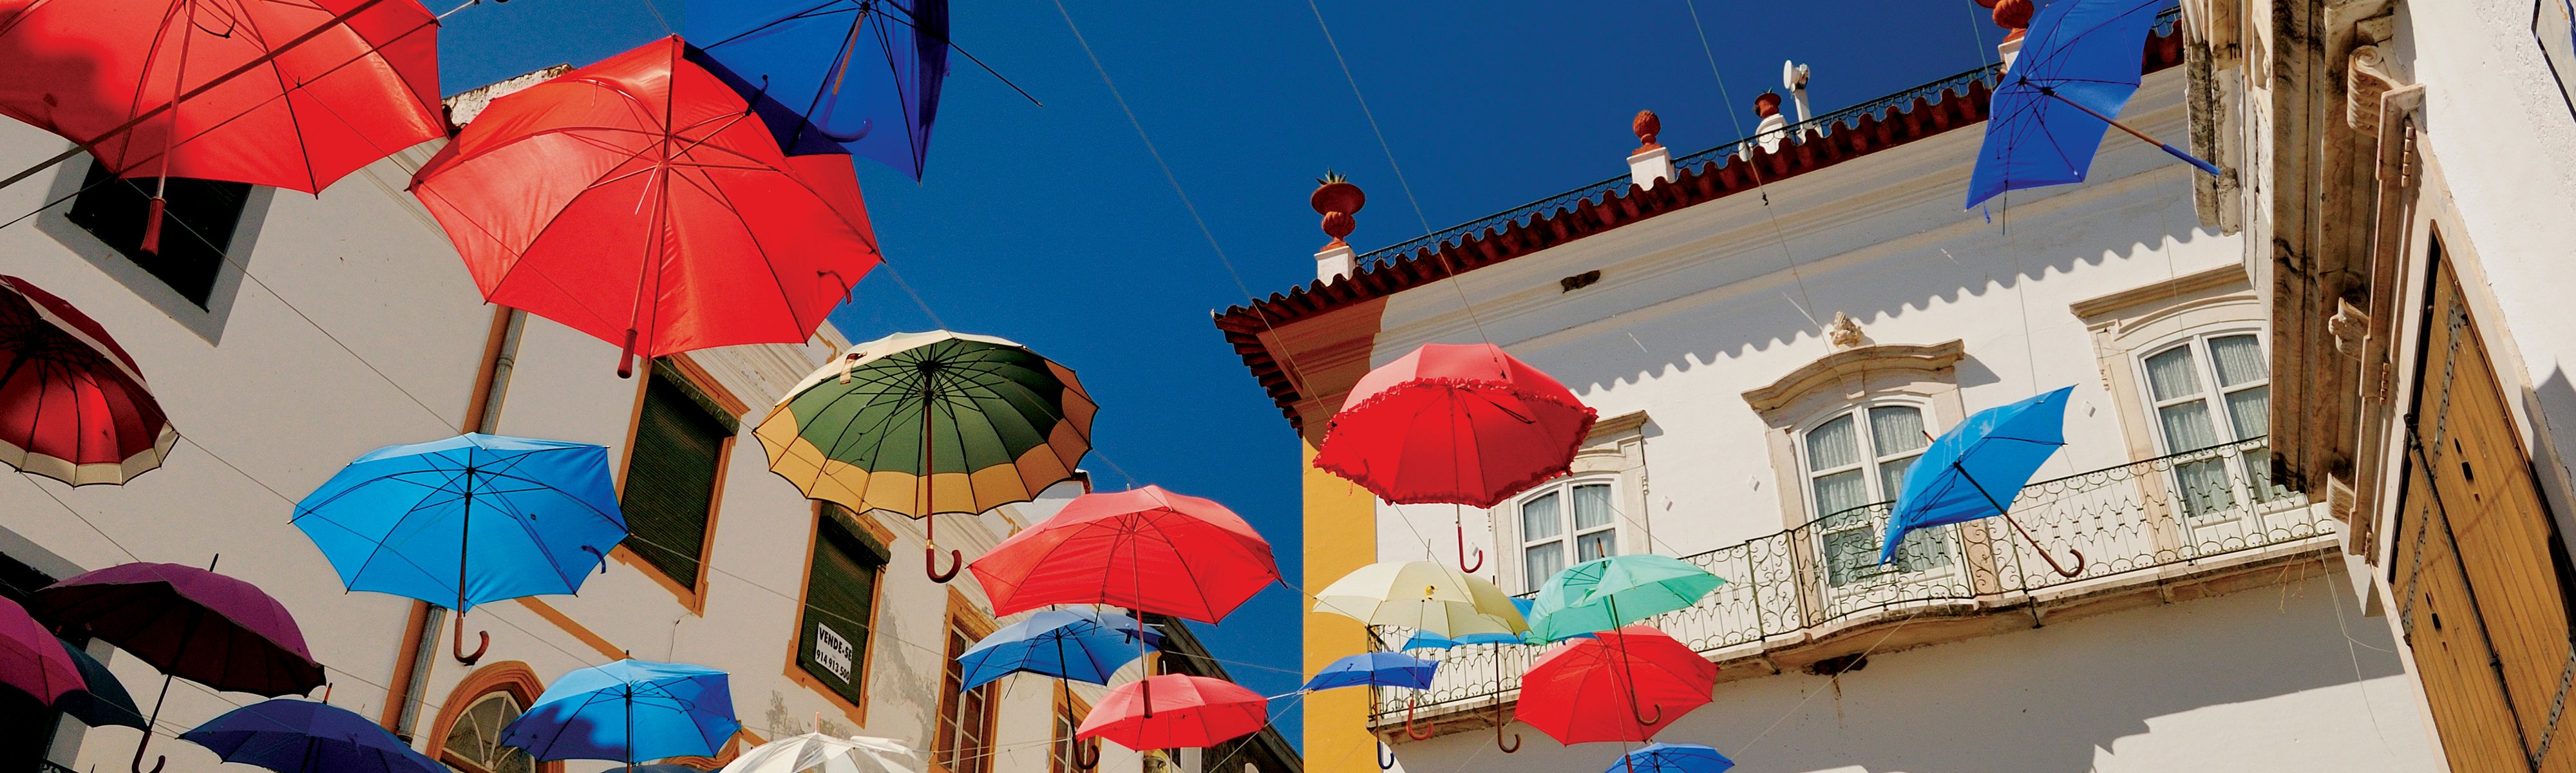 colorful umbrellas hung up in plaza in lisbon portugal